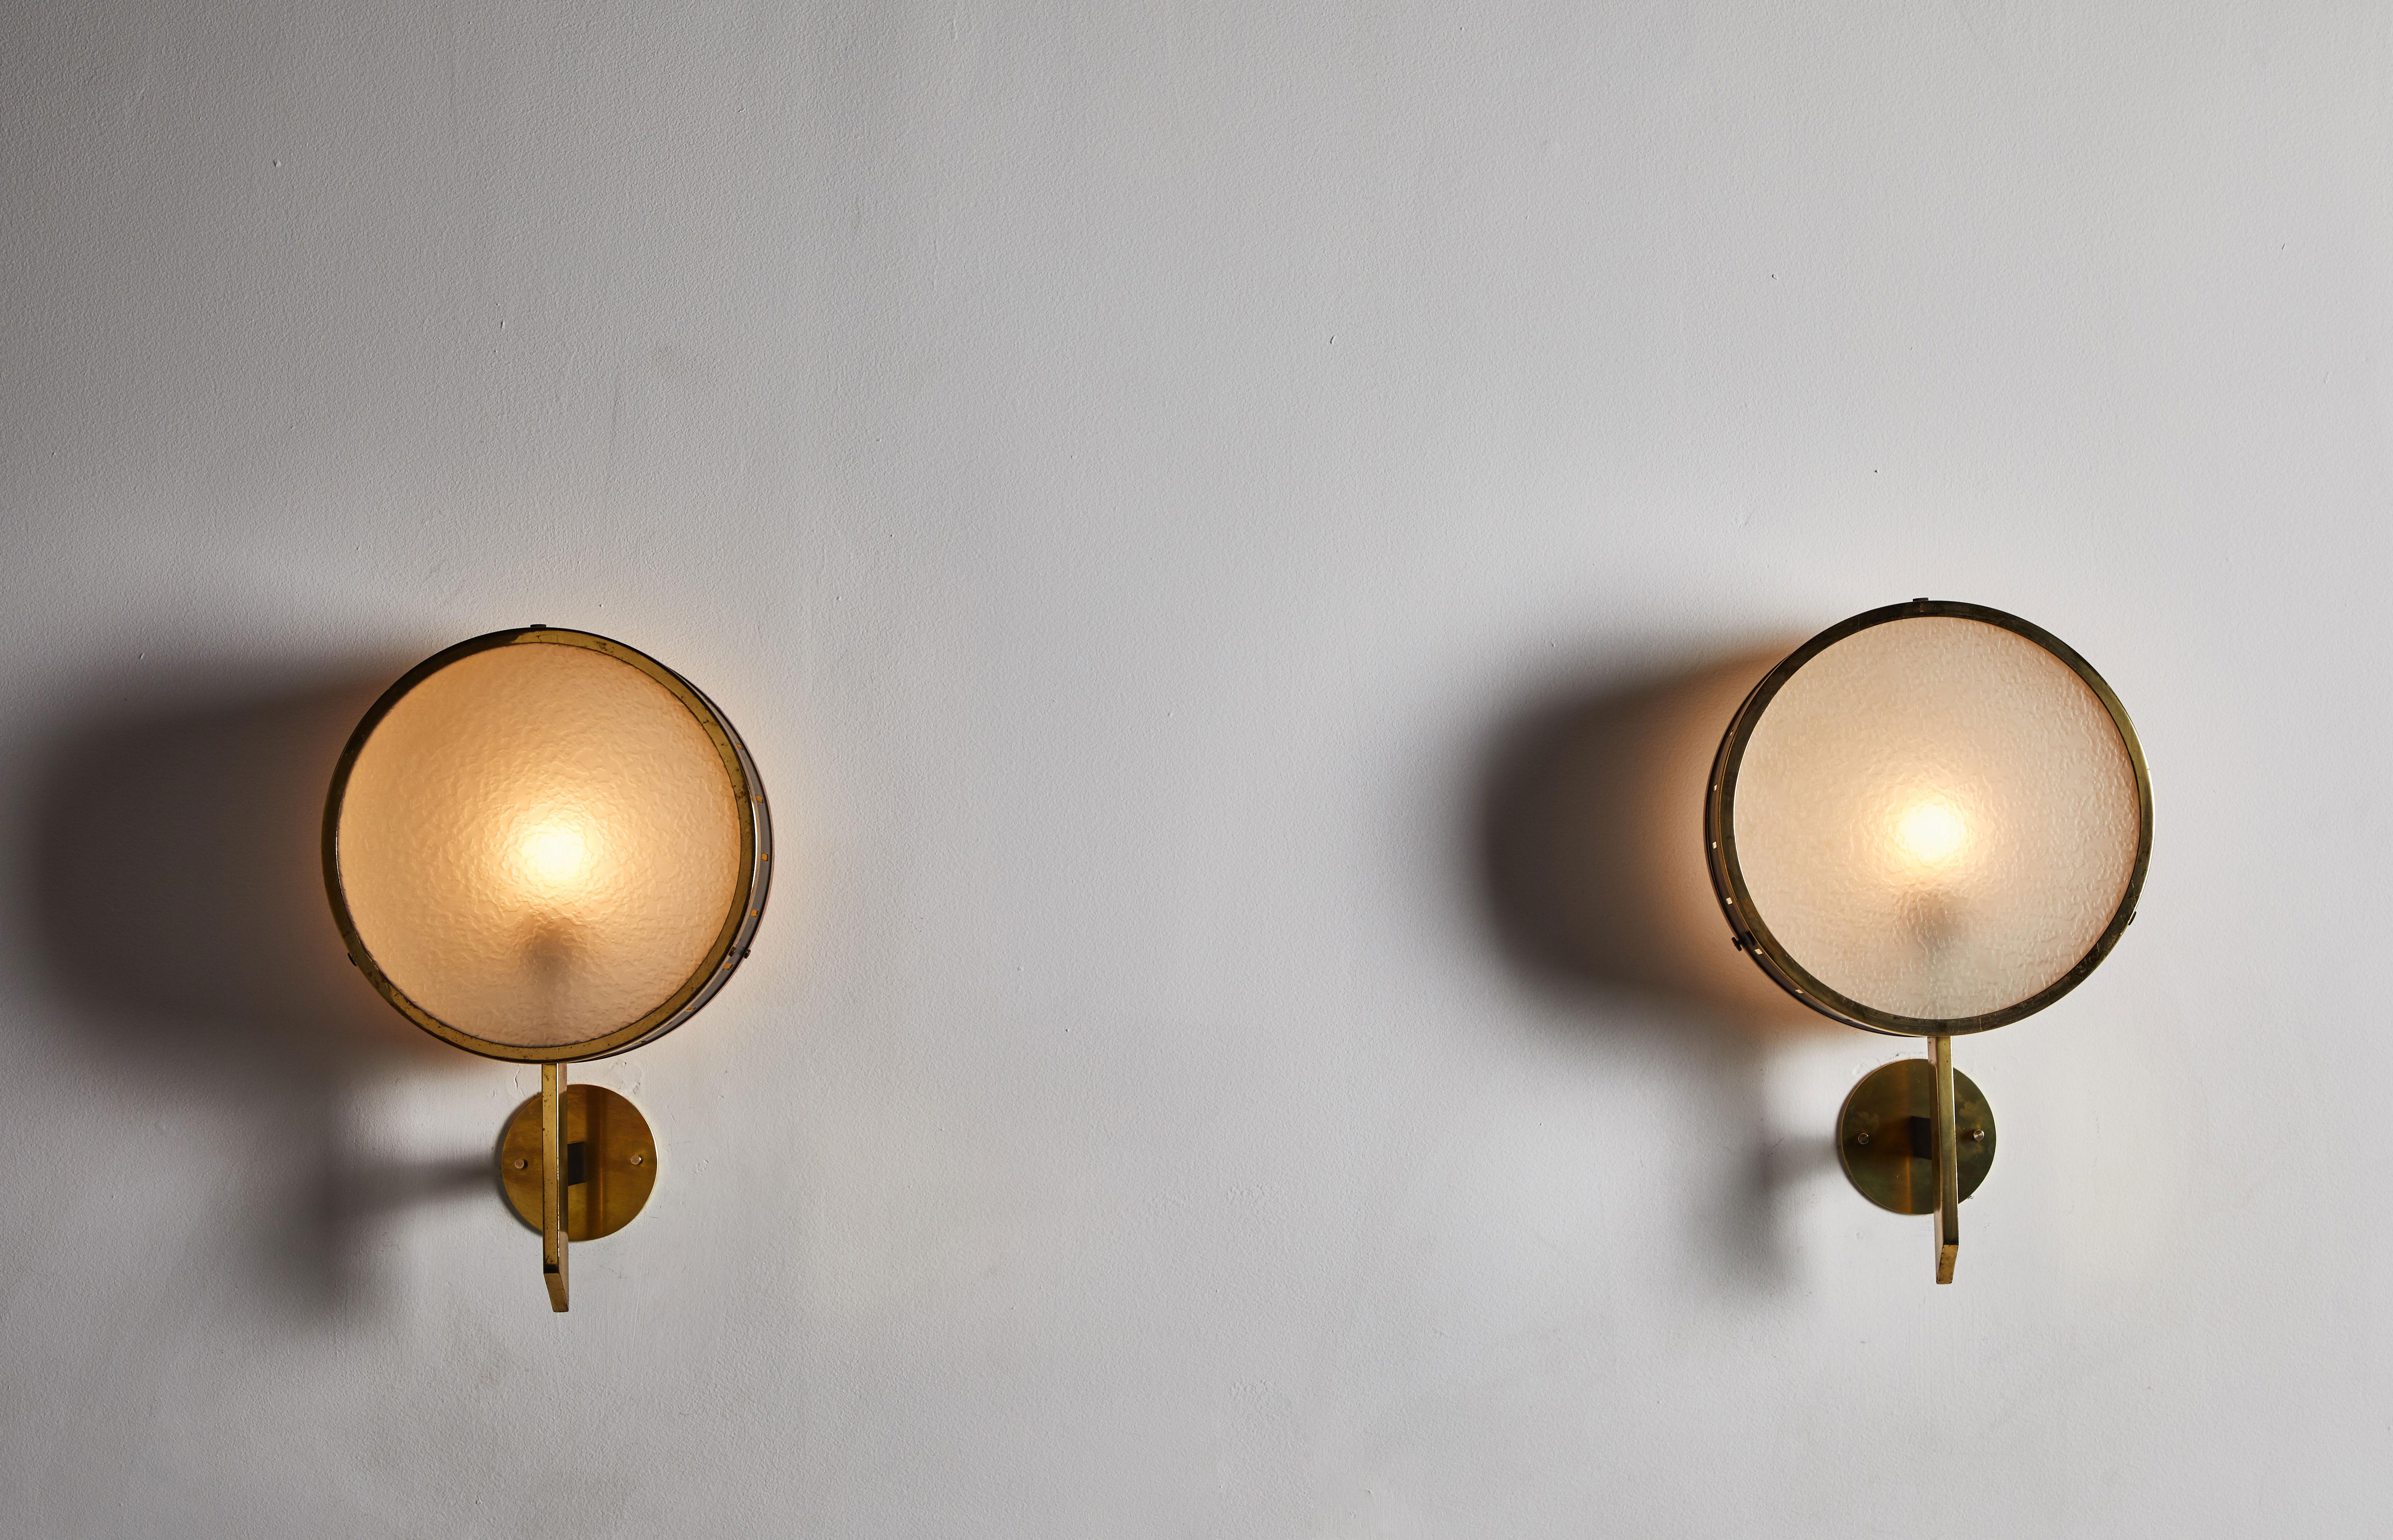 Pair of sconces manufactured by Stilnovo in Italy, circa 1950s. Textured glass diffuser, perforated enameled metal shade with brass hardware. Rewired for US junction boxes. Each light takes one E26 60w maximum bulbs.